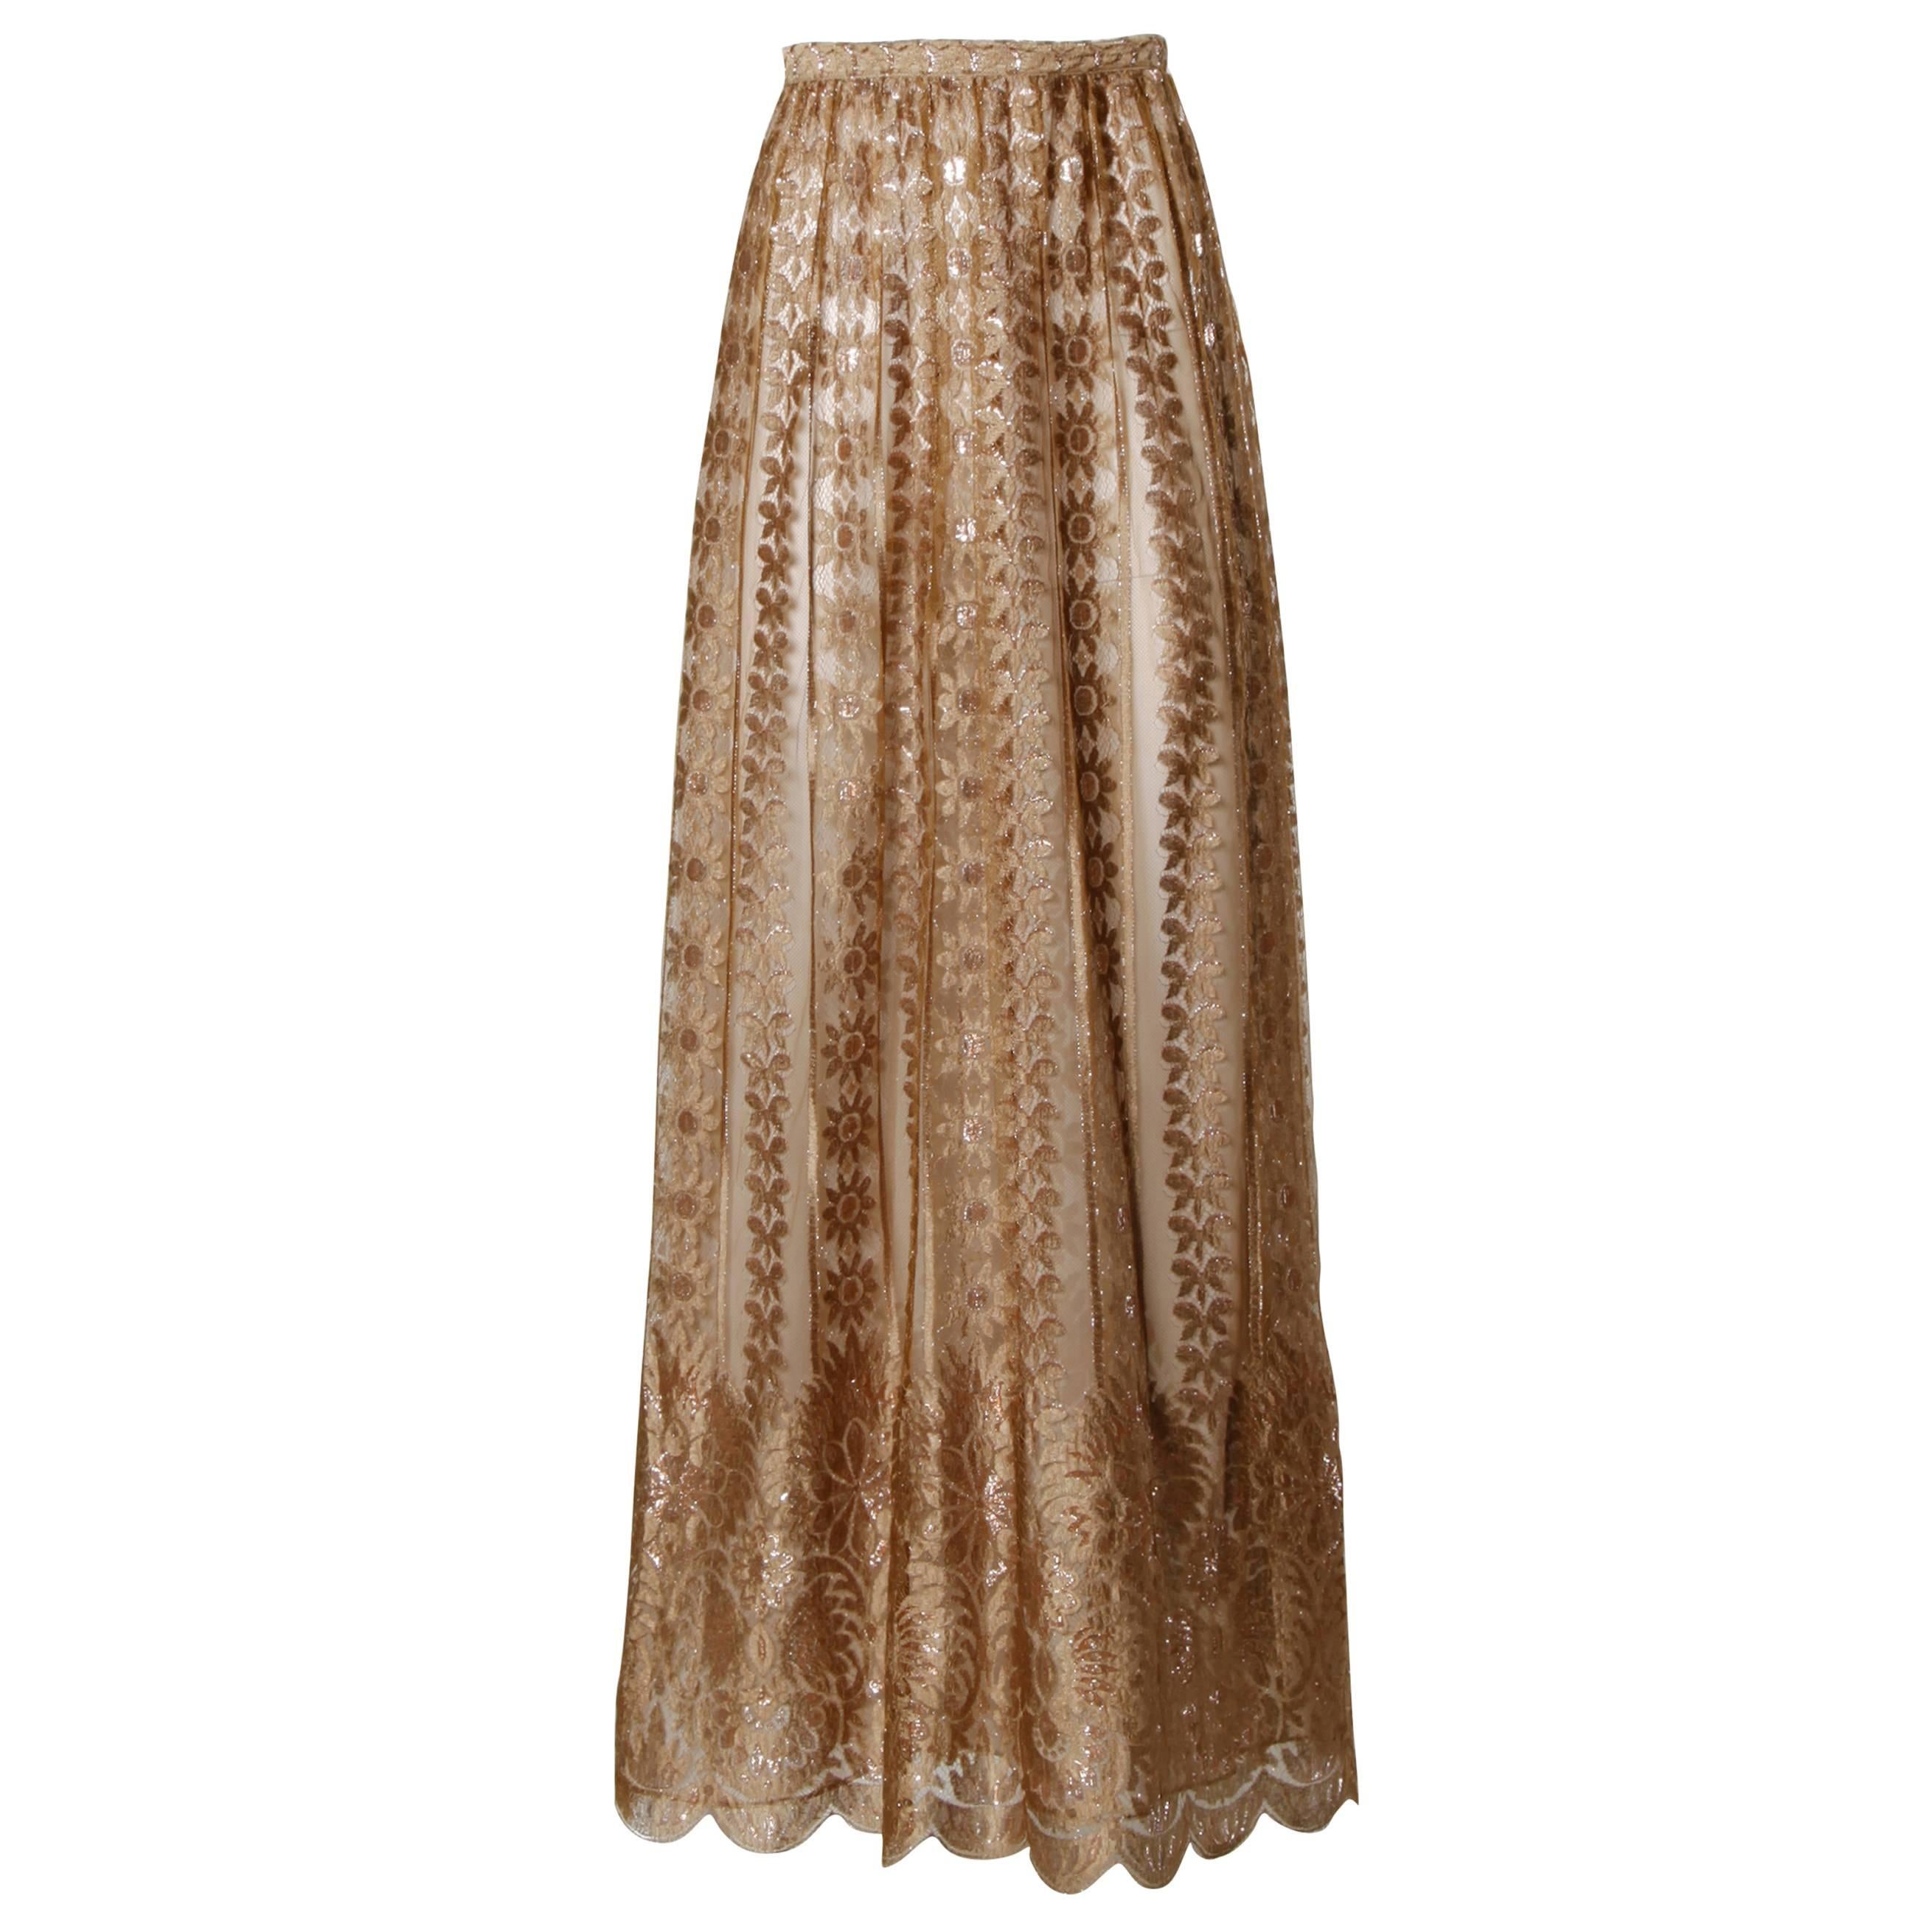 Jill Richards Vintage Scalloped Metallic Copper + Taupe Lace Maxi Skirt